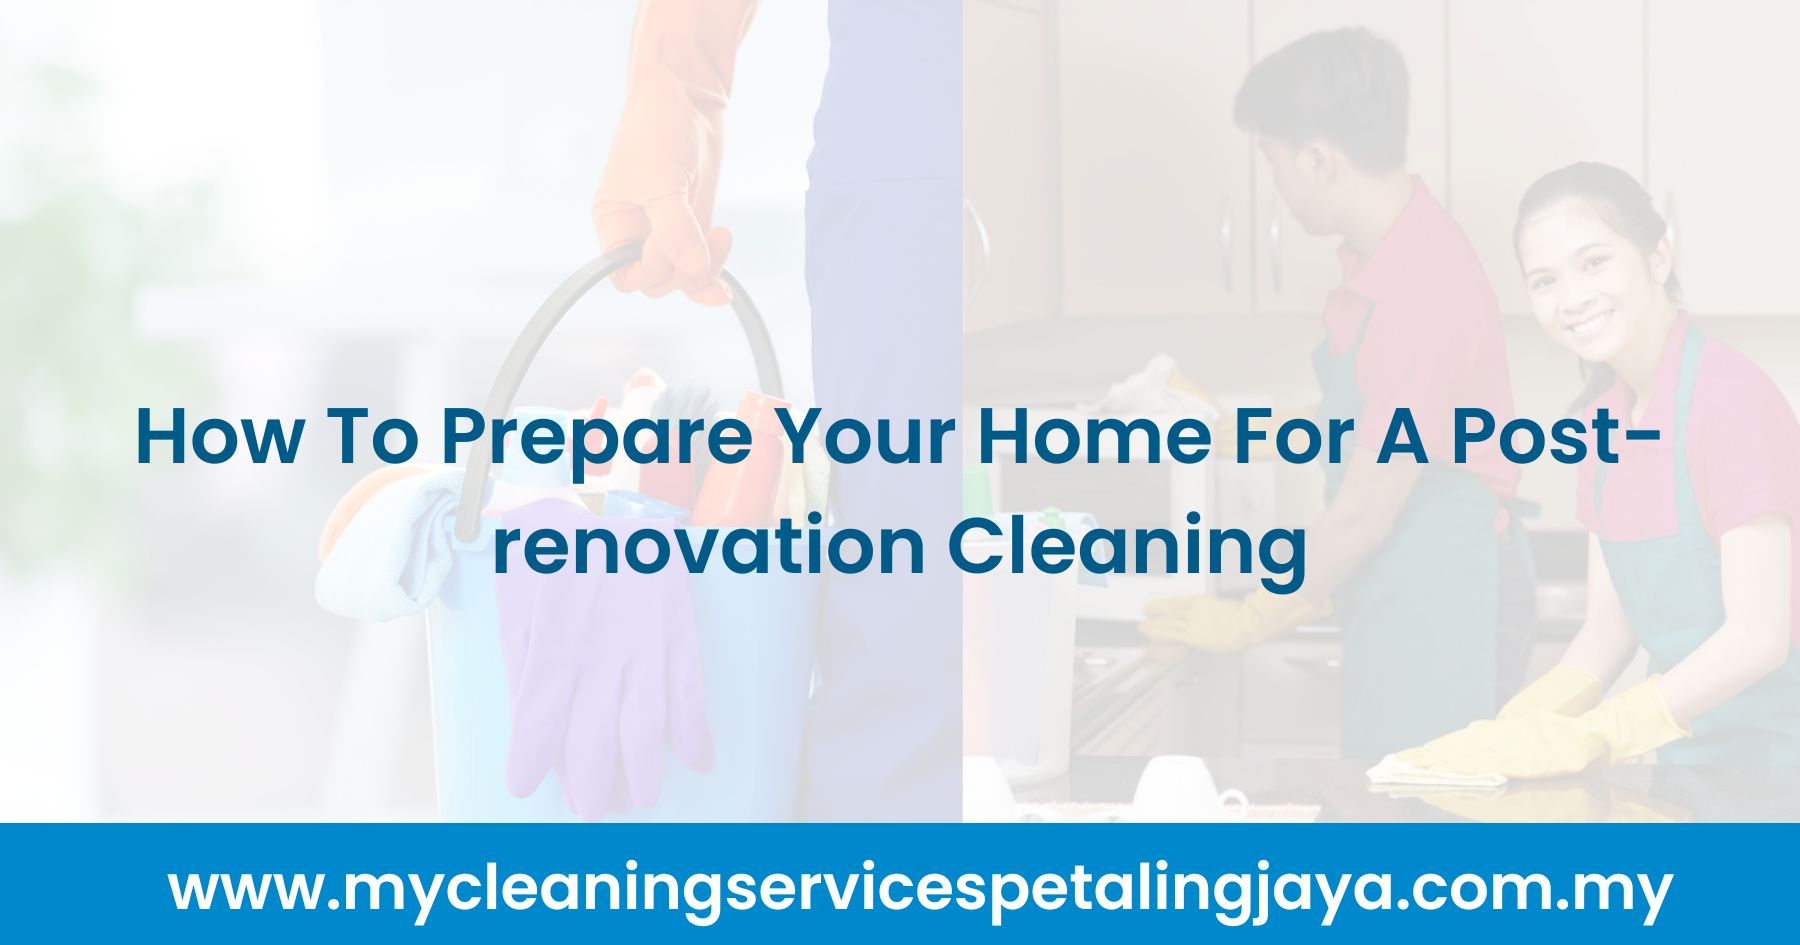 How To Prepare Your Home For A Post-renovation Cleaning